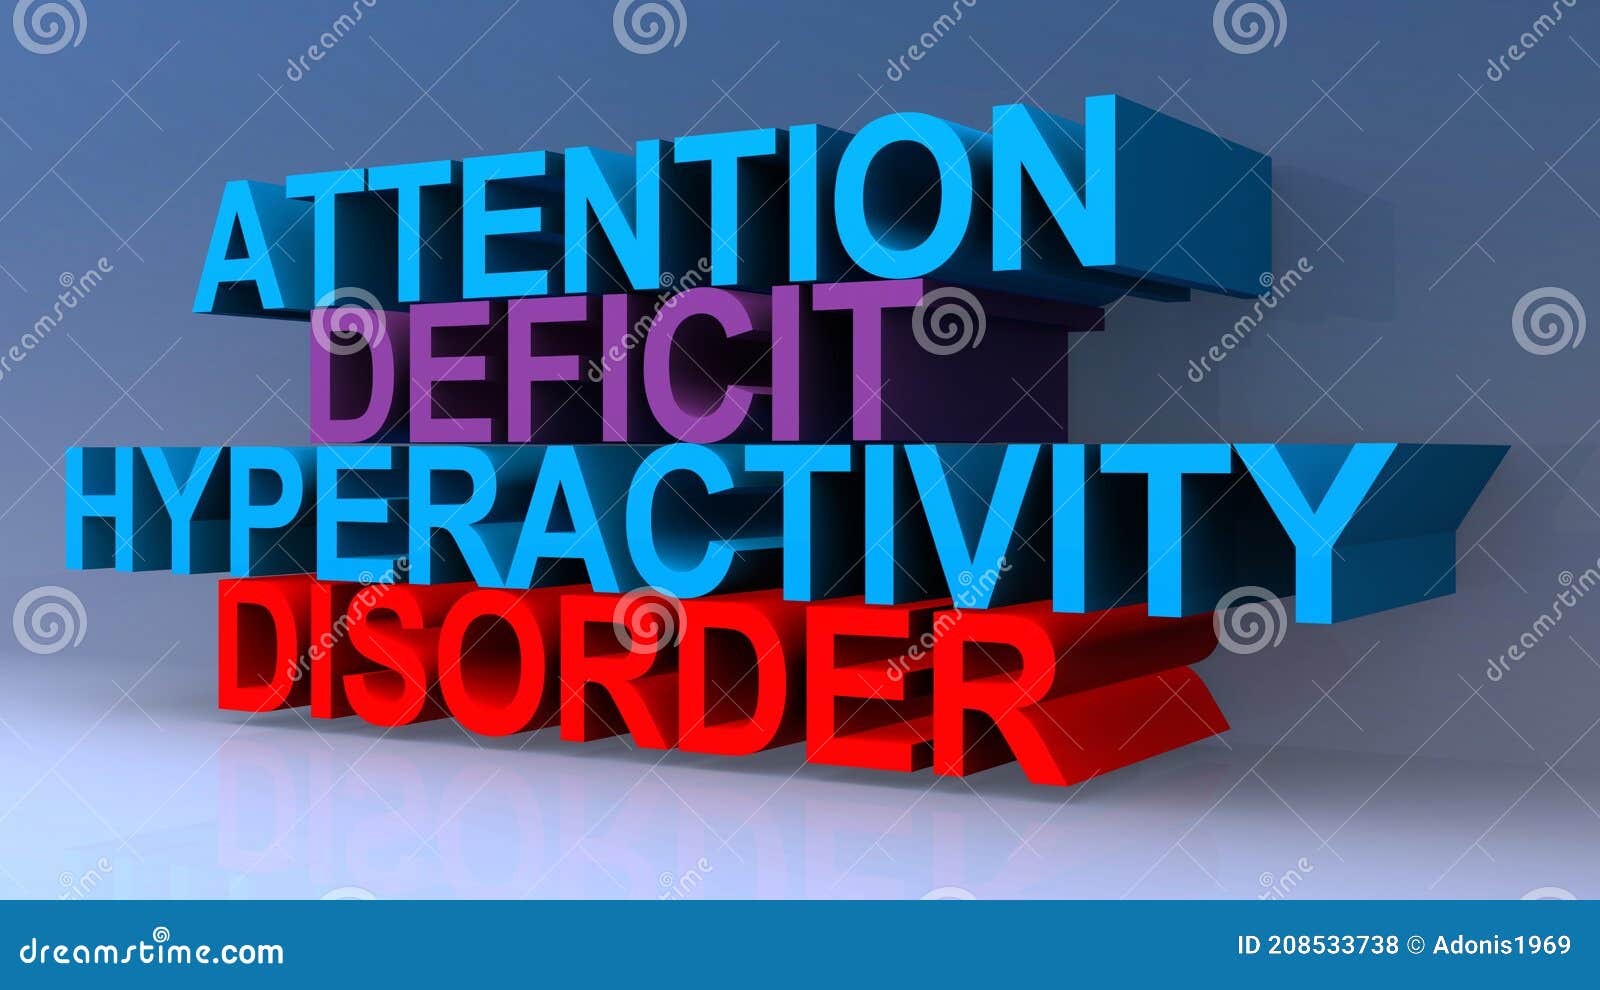 attention deficit hyperactivity disorder on blue